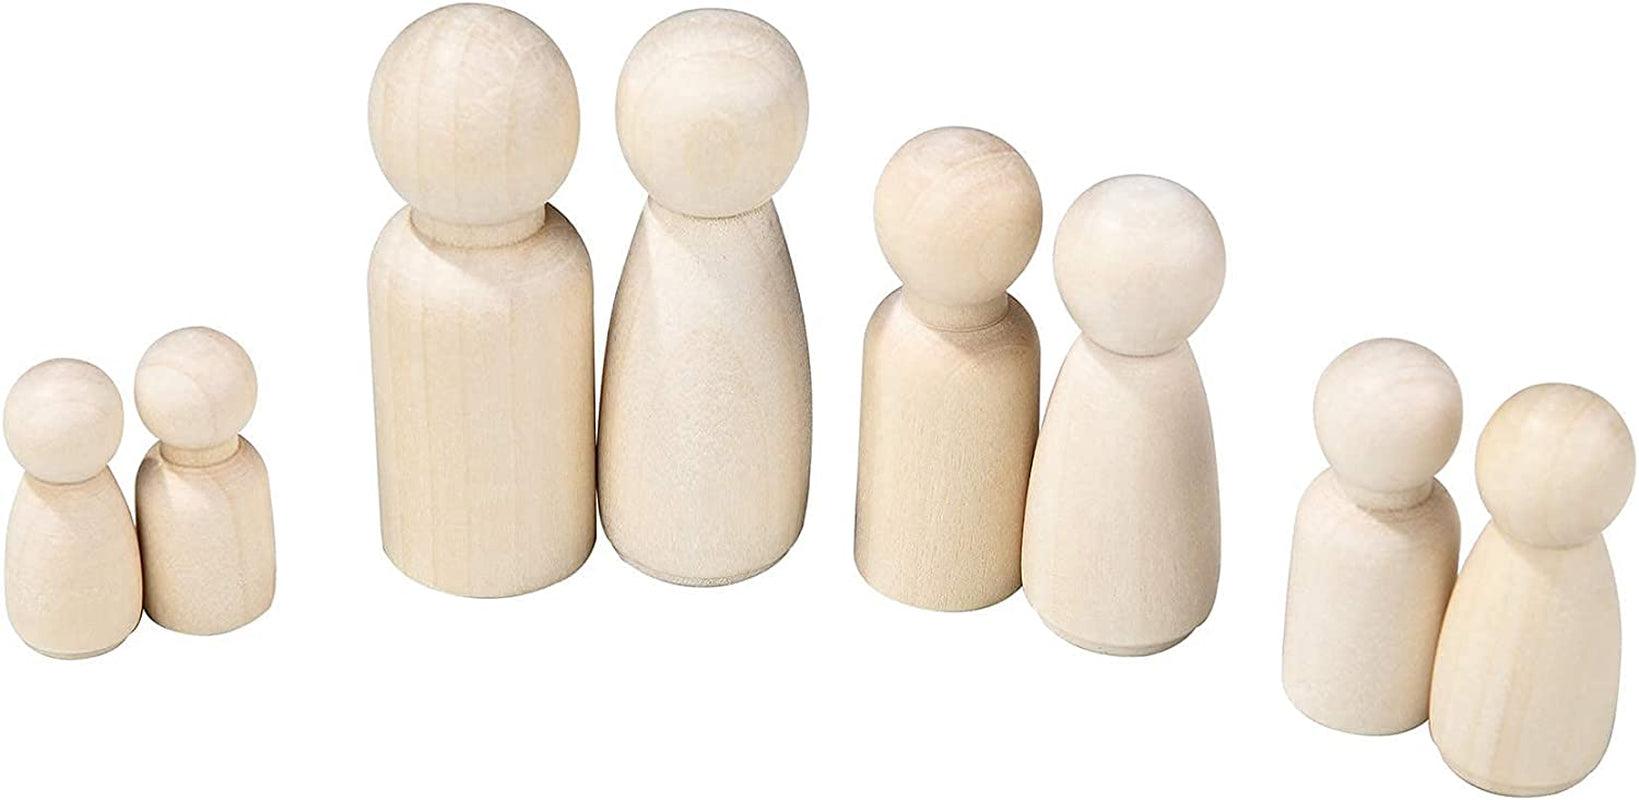 60pcs Peg Dolls Decorative Wooden Peg Doll Assorted Sizes Unfinishied Peg  People Doll Bodies Wooden Figures for Painting Craft Art Projects Peg Game